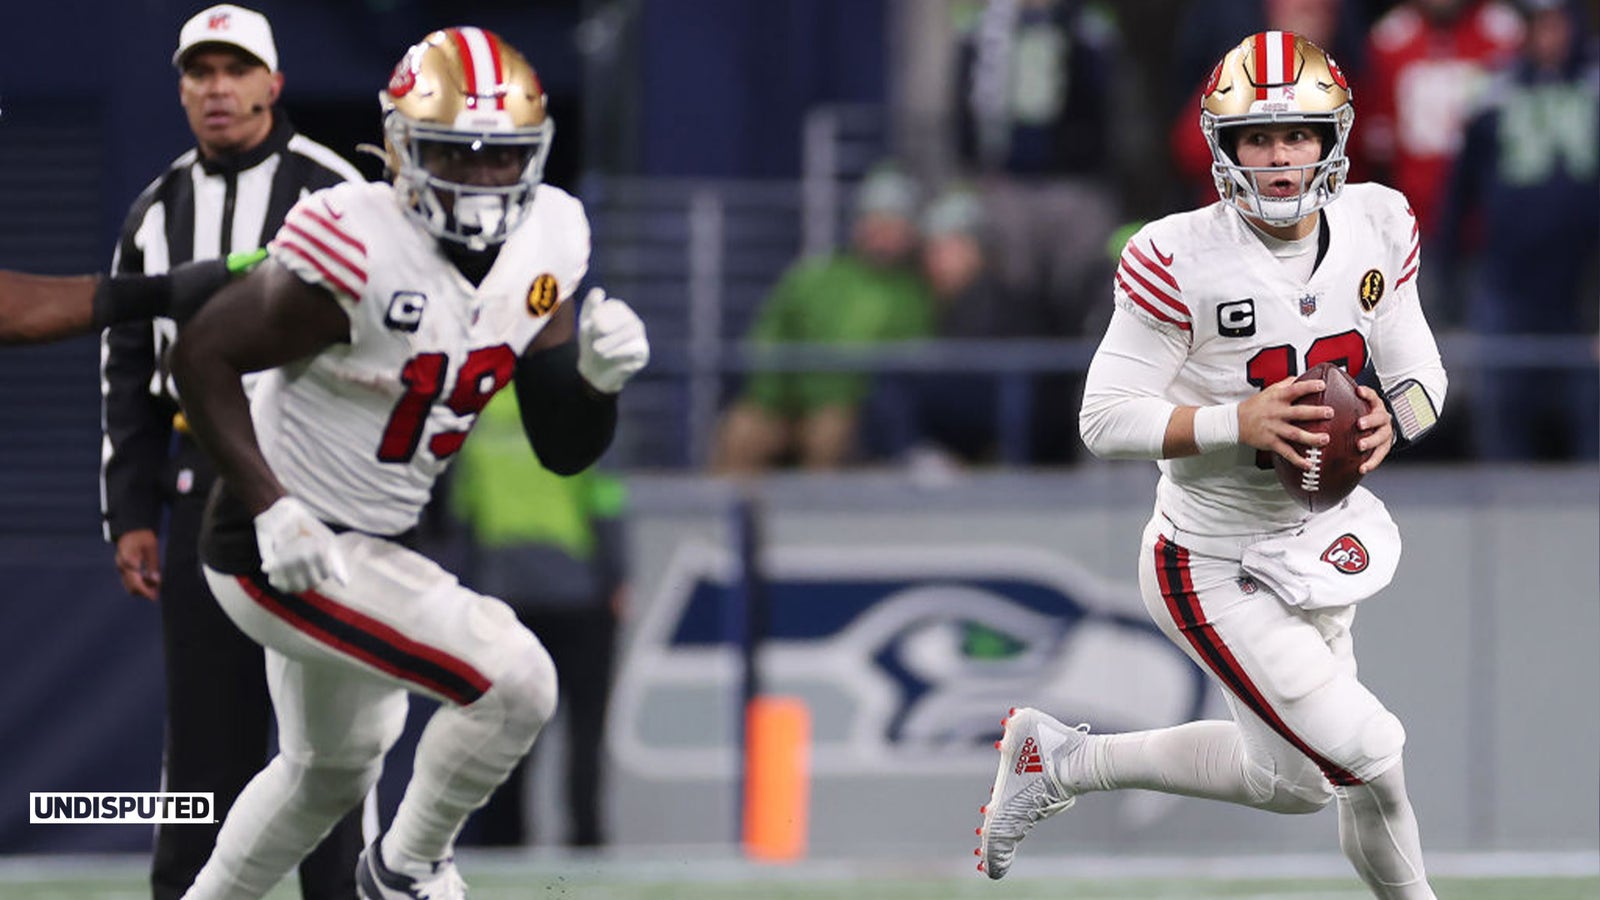 49ers force two turnovers, sack Geno Smith six times in 31-13 win vs. Seahawks 